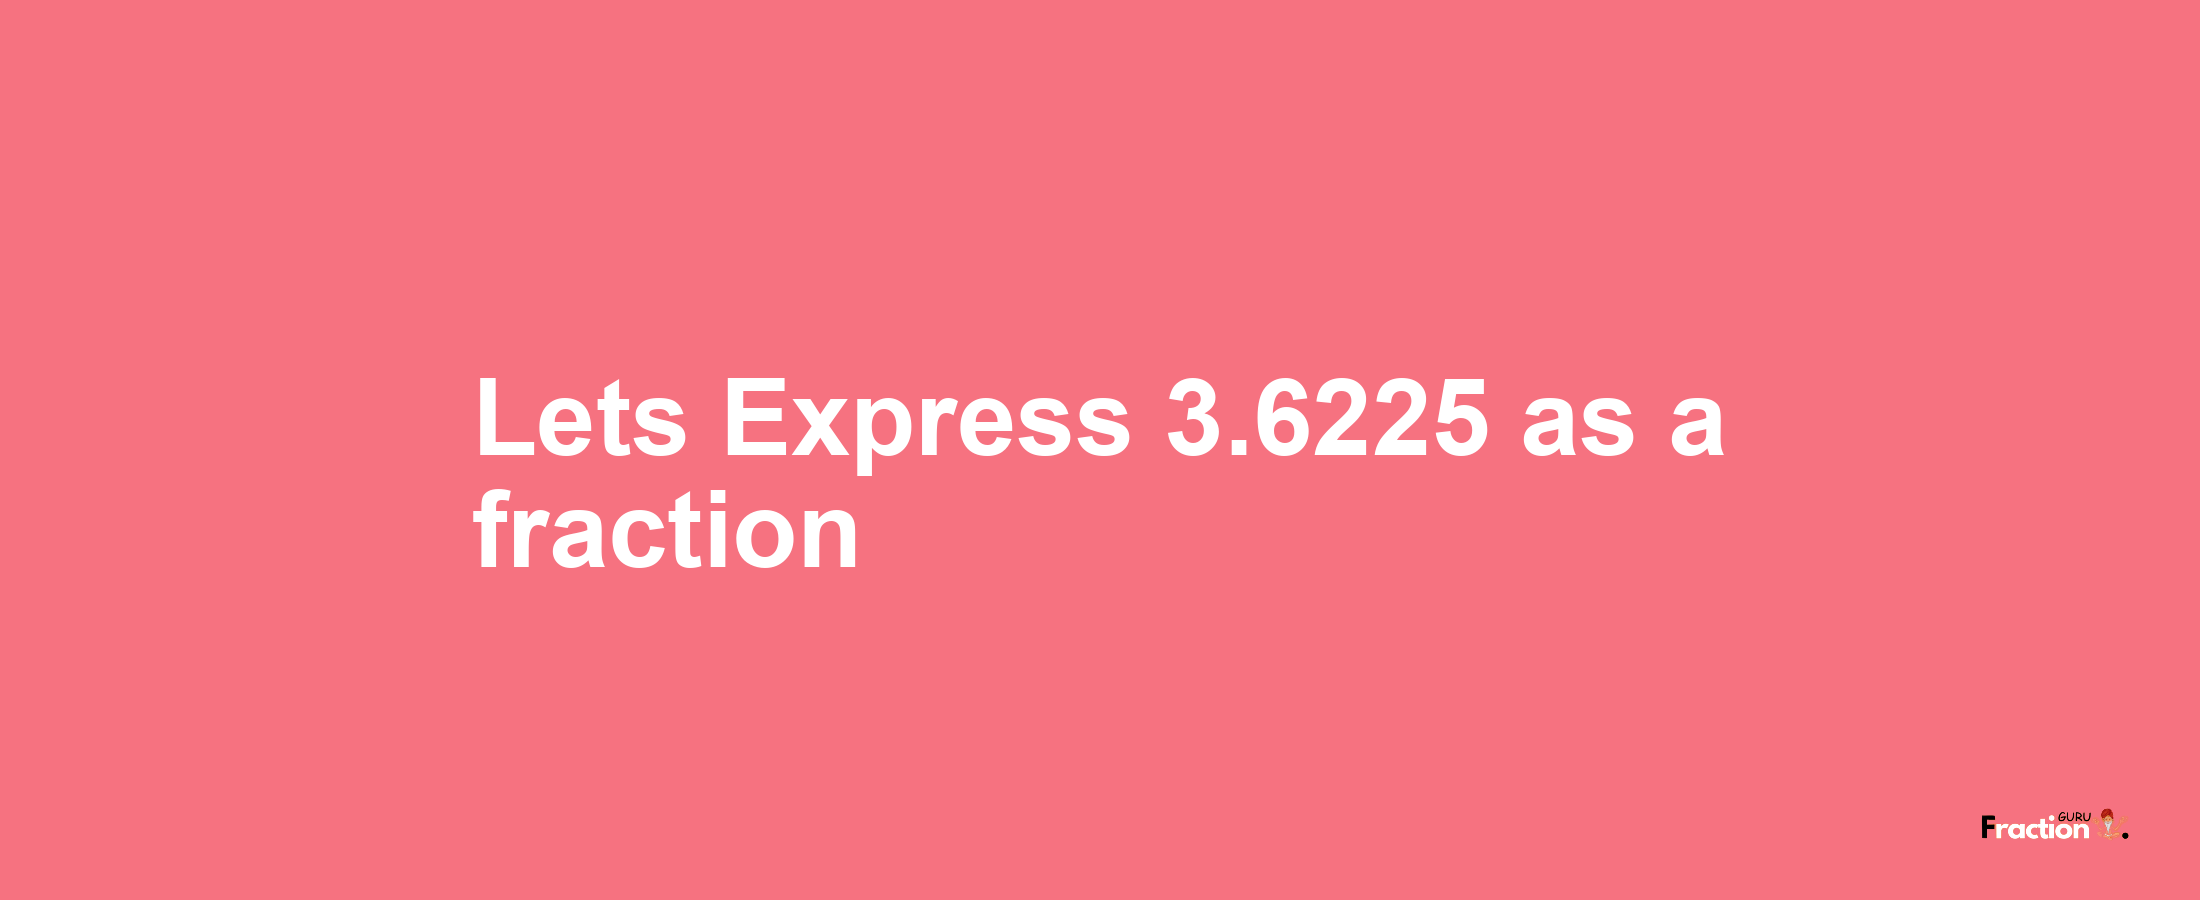 Lets Express 3.6225 as afraction